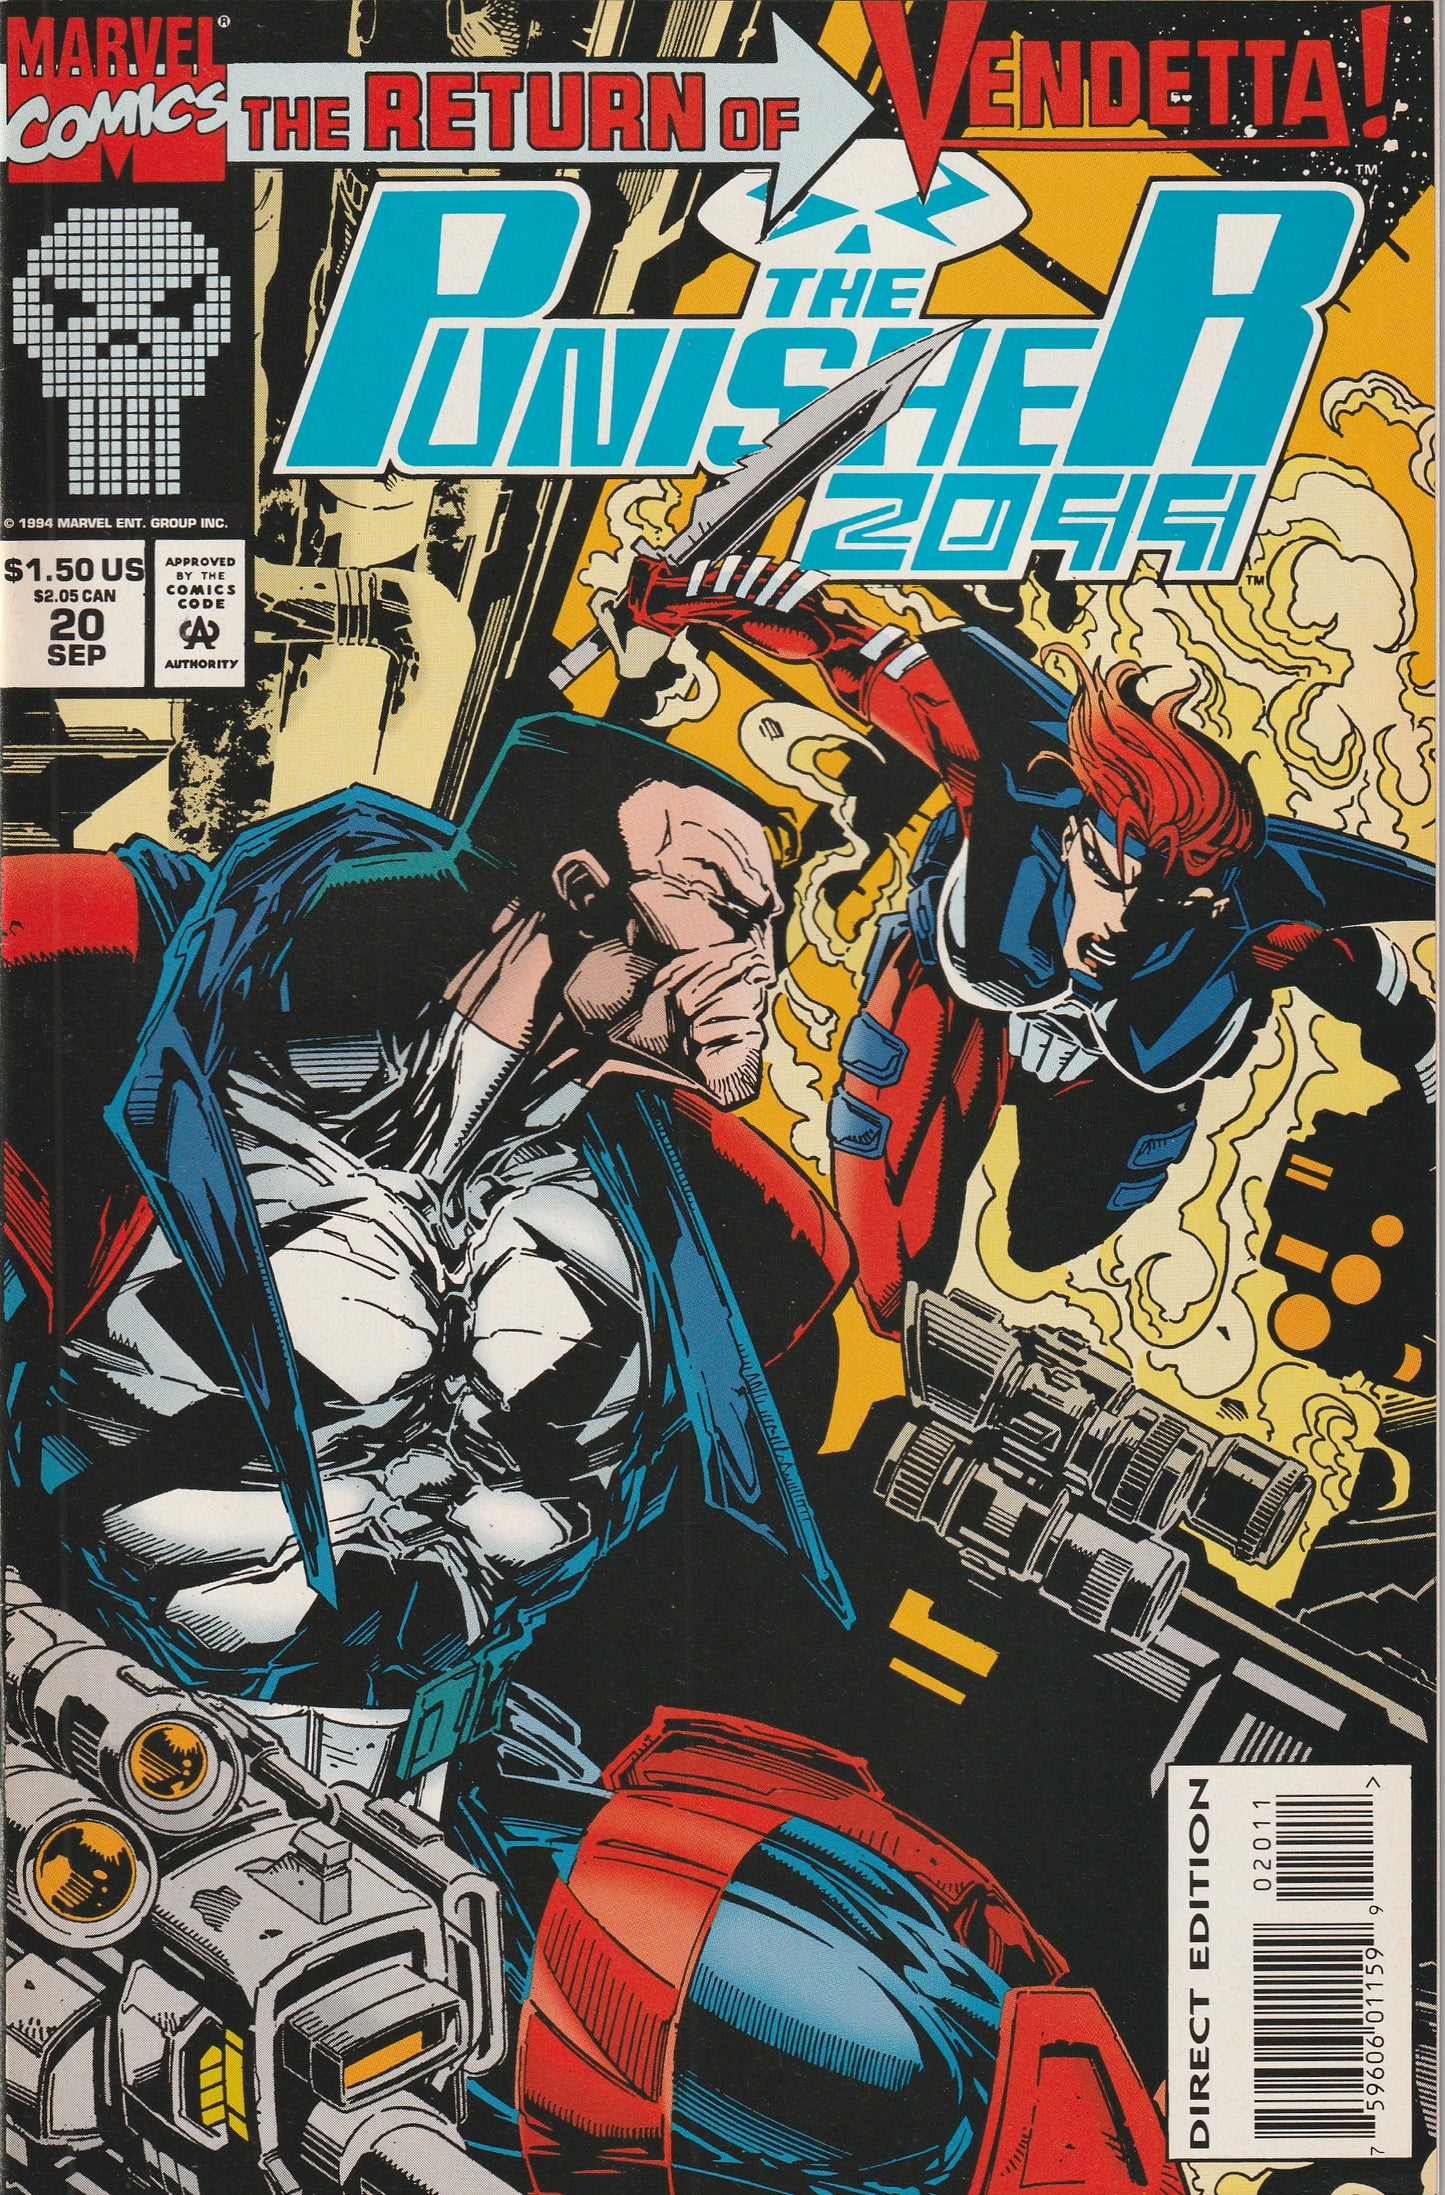 Punisher 2099 #20 (1994) - 1st appearance of Hotwire (Dean Gallows)